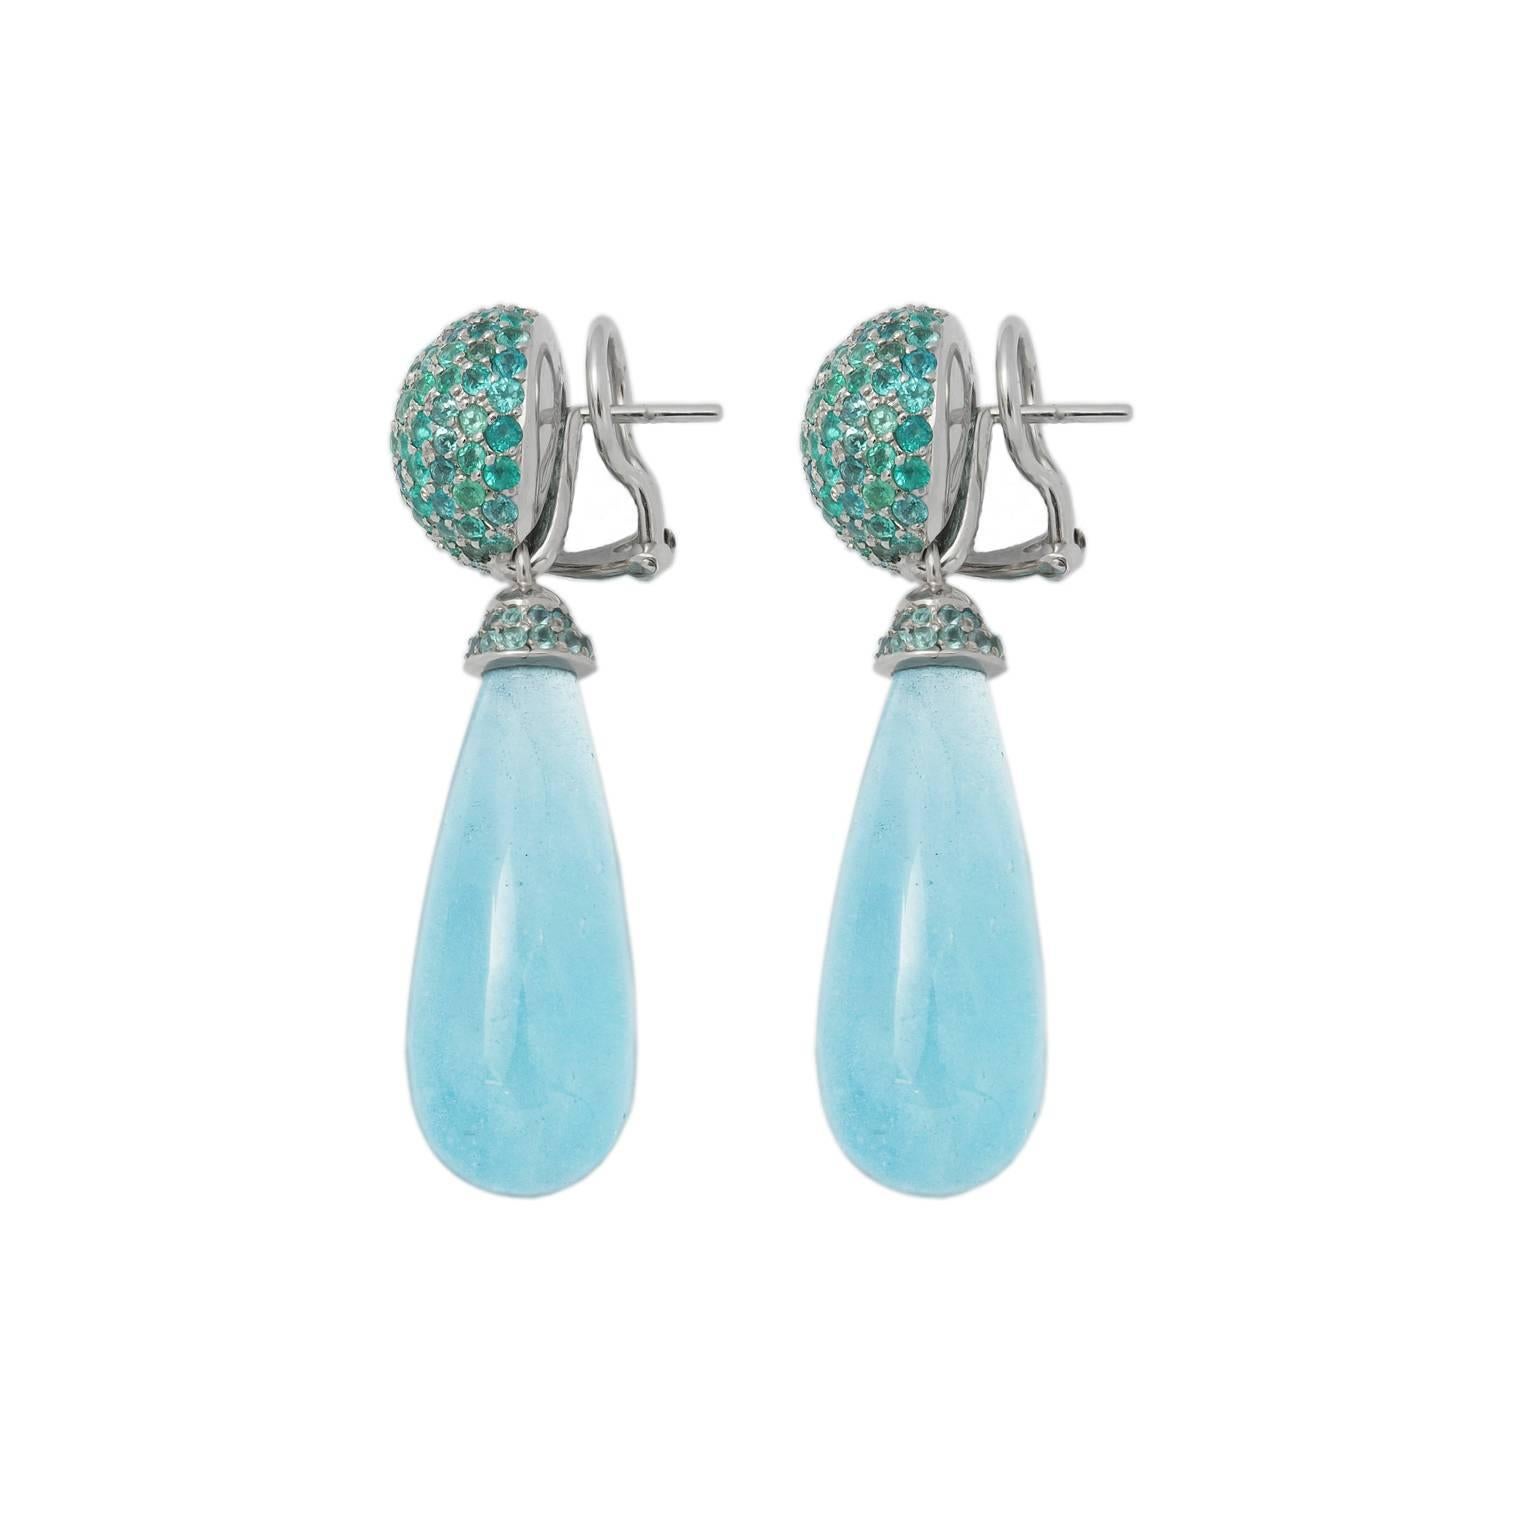 At the top of these breathtaking earrings in 18k white gold very rare paraiba tourmalines 5.87 ct out of the original brasilian mine are twinkling. The marvelous aquamarines 65.76 ct are detachable.
The upper part can be worn alone, it has a